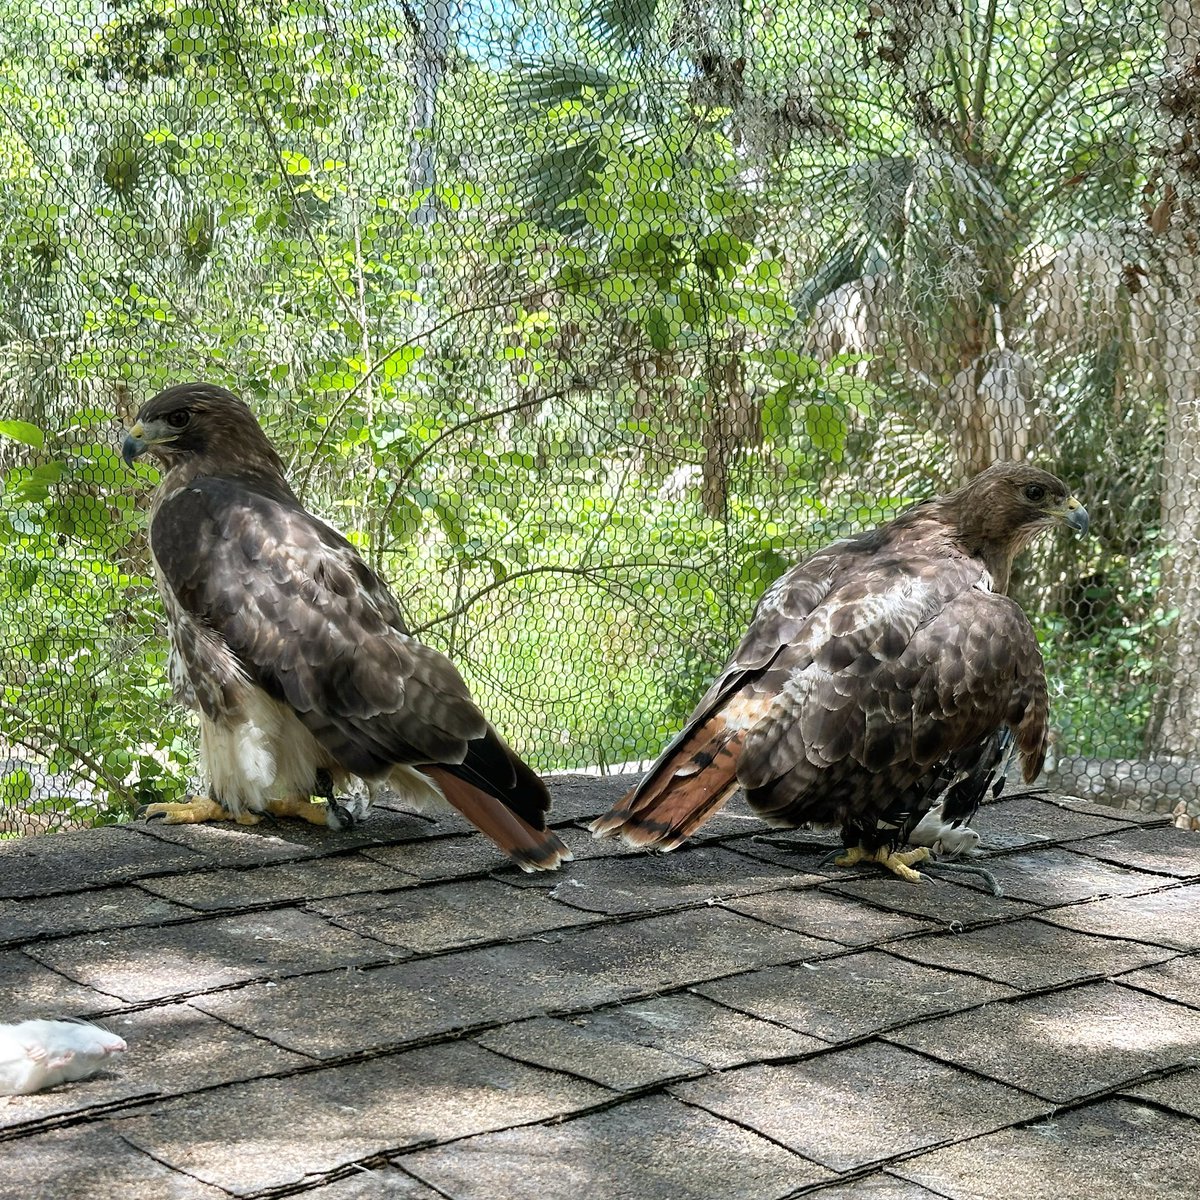 Worked with these two red tailed hawks today. #hawk #bird #birdofprey #wing #feather #raptor